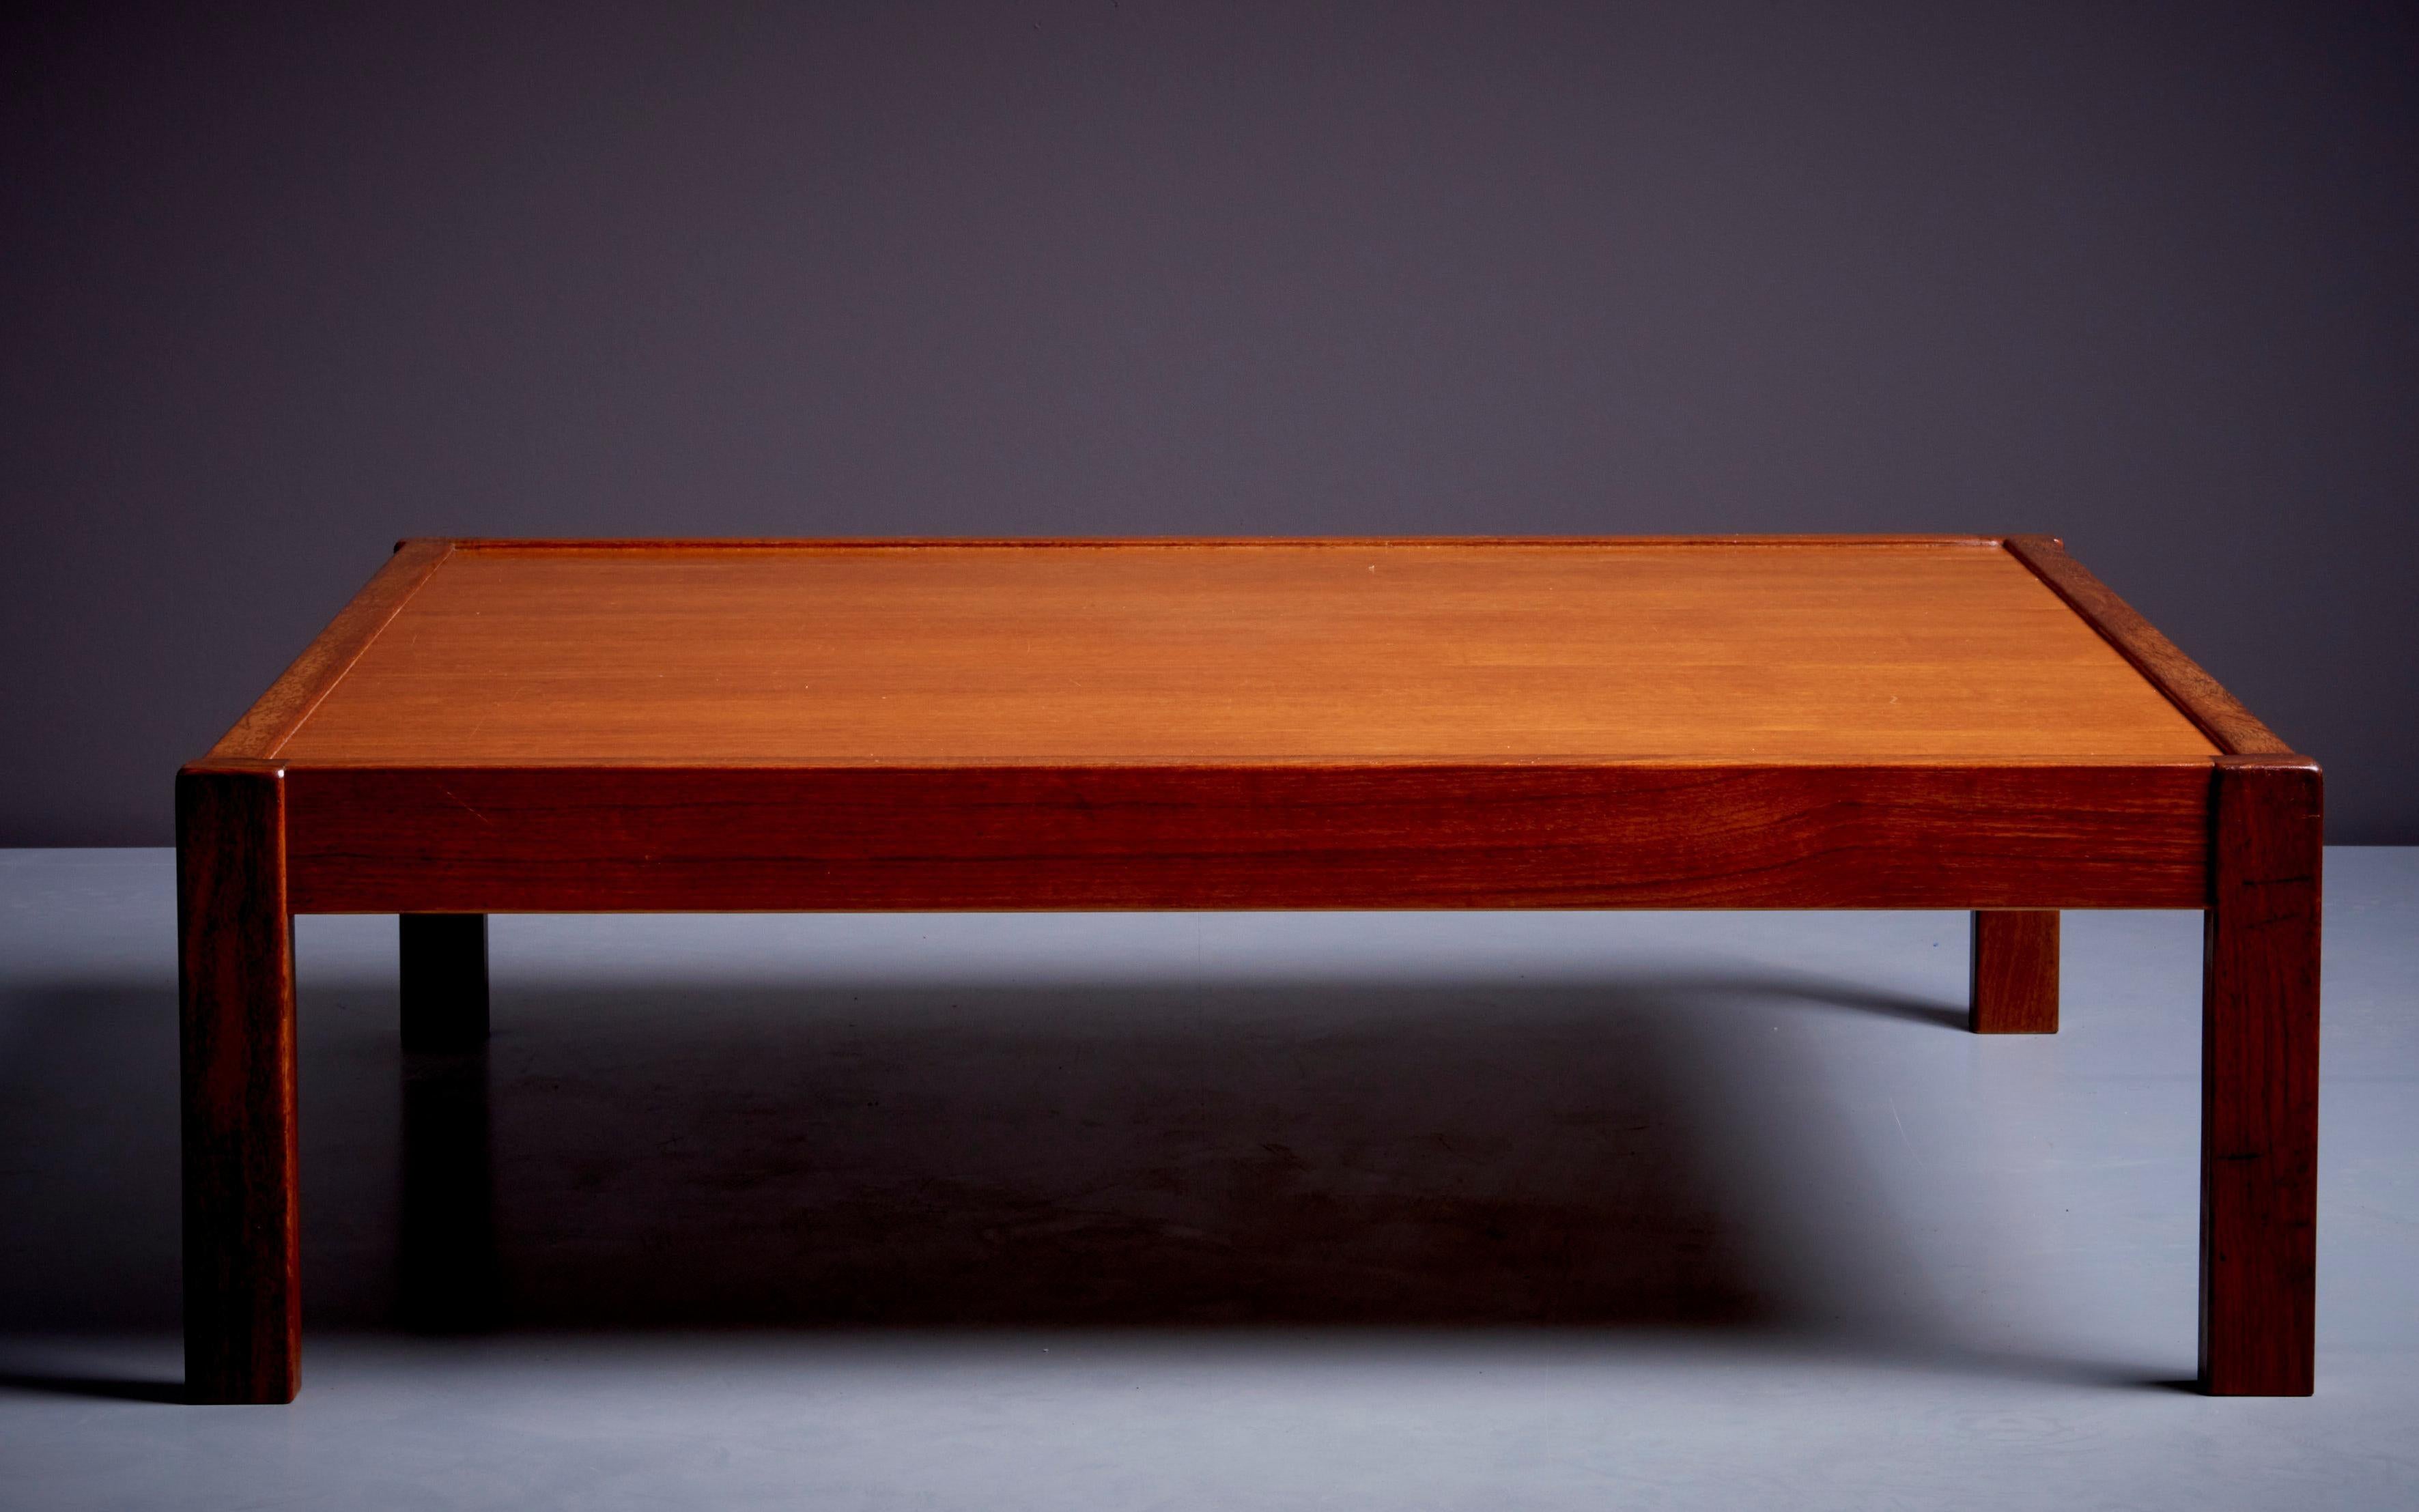 Børge Mogensen teak coffee table. Børge Mogensen (1914-1972) was a prominent Danish furniture designer who made significant contributions to the development of Mid-Century Modern design. Mogensen trained as a cabinetmaker before studying at the